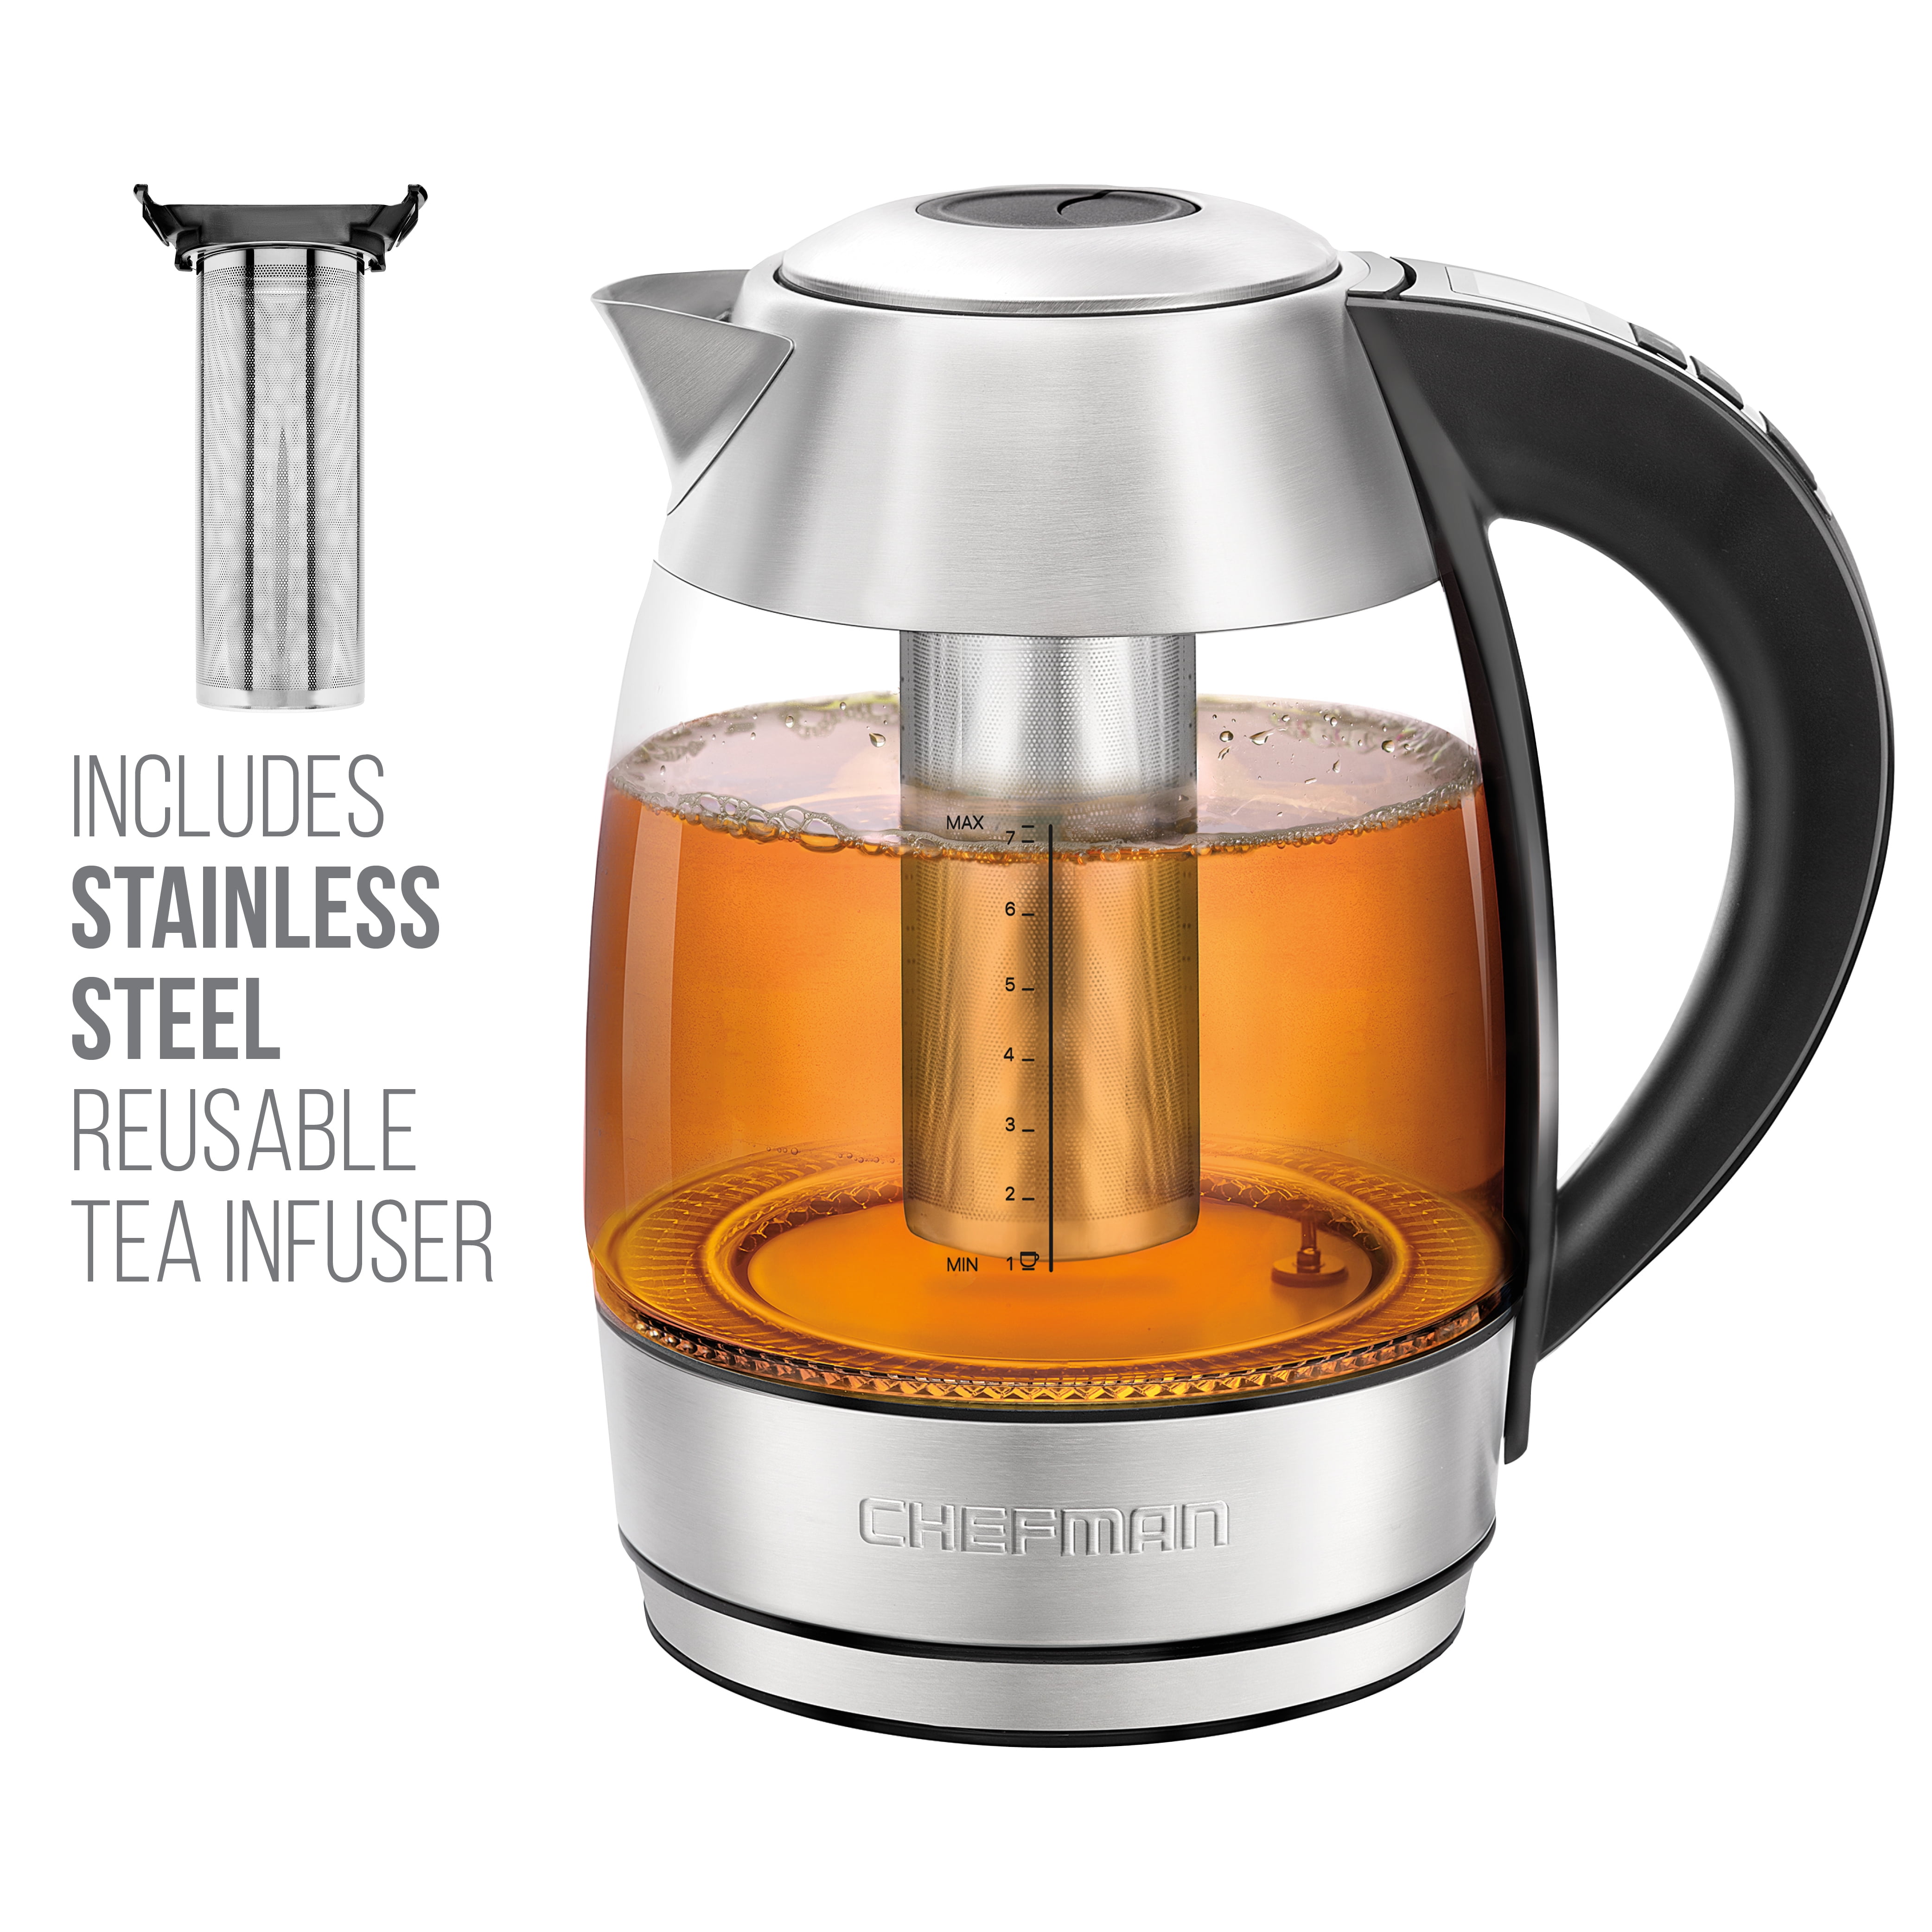 Chefman Electric Glass Kettle W/ Tea Infuser, Stainless Steel, 1.8 Liters